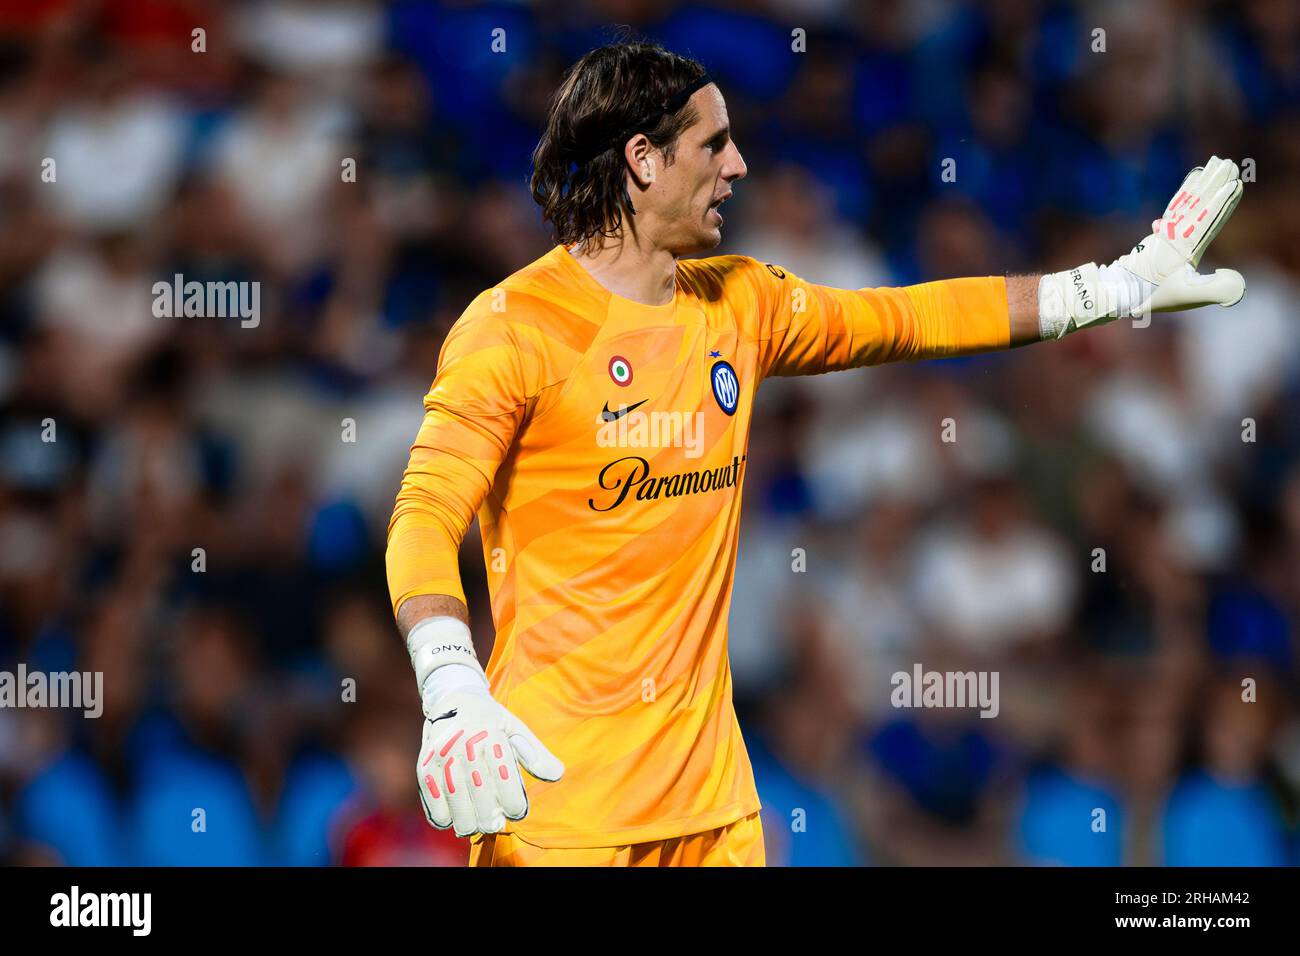 Yann Sommer of FC Internazionale gestures during the friendly football match between FC Internazionale and KF Egnatia. Stock Photo